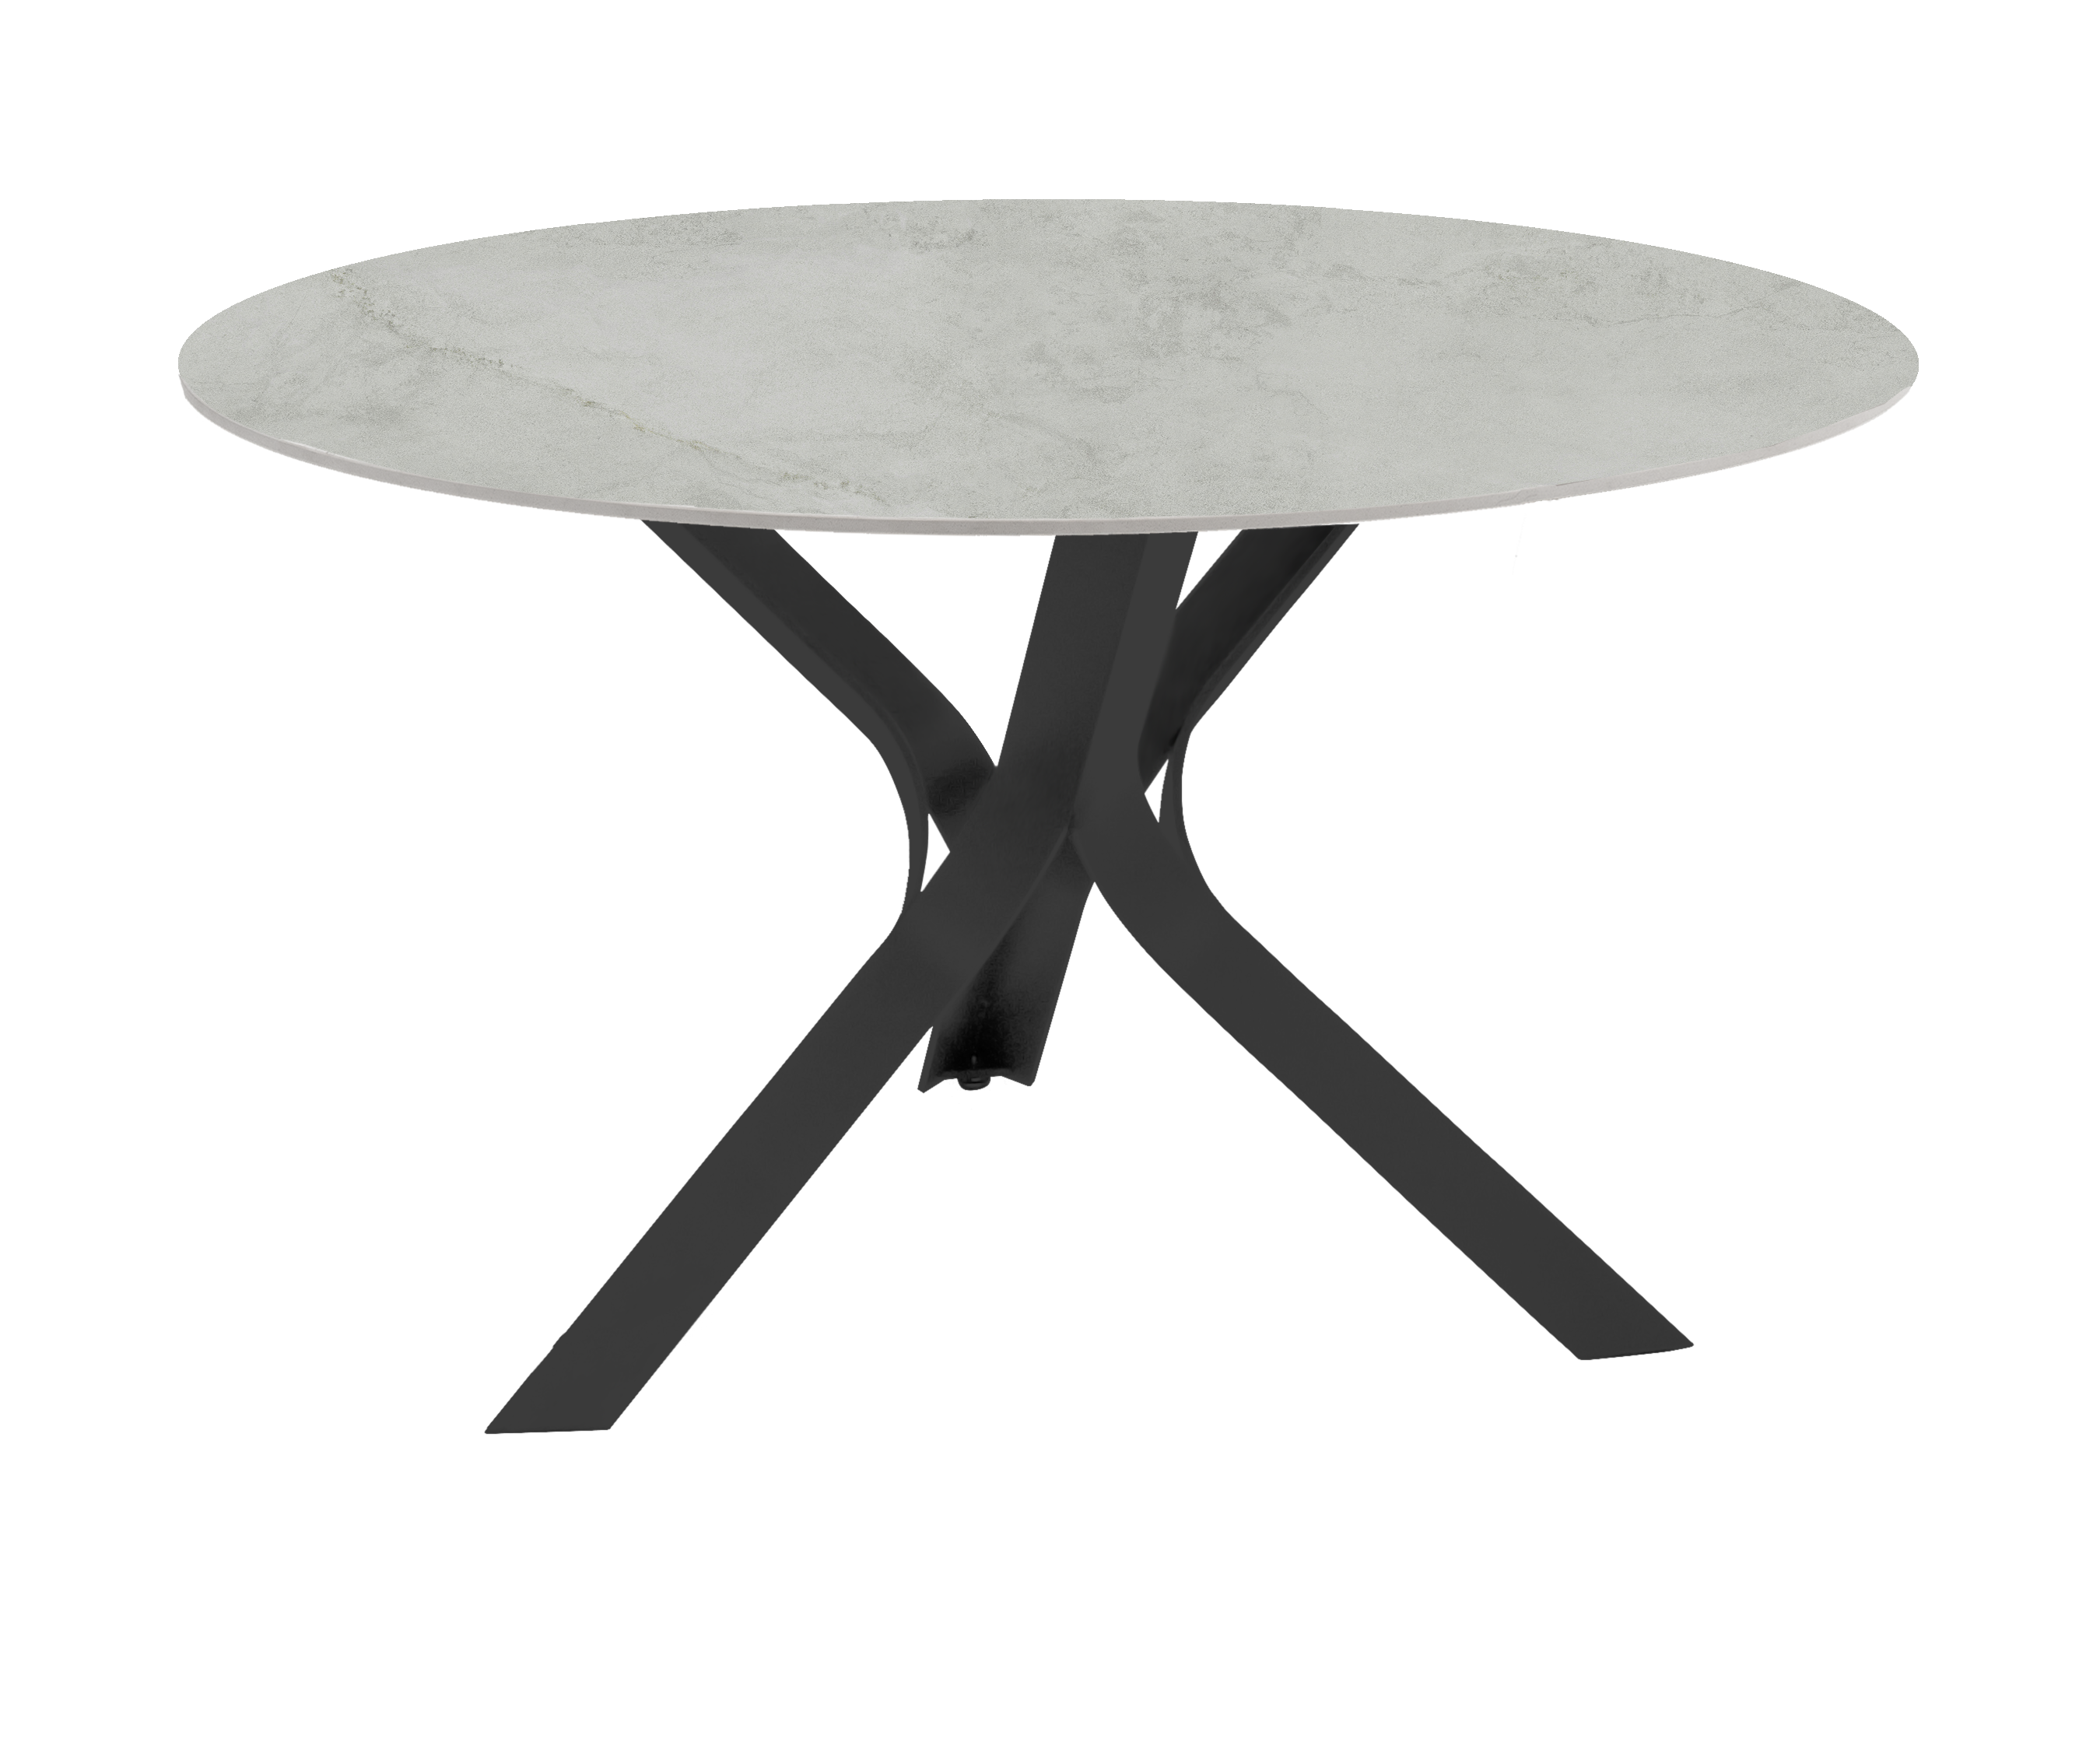 Kron Round Dining Table